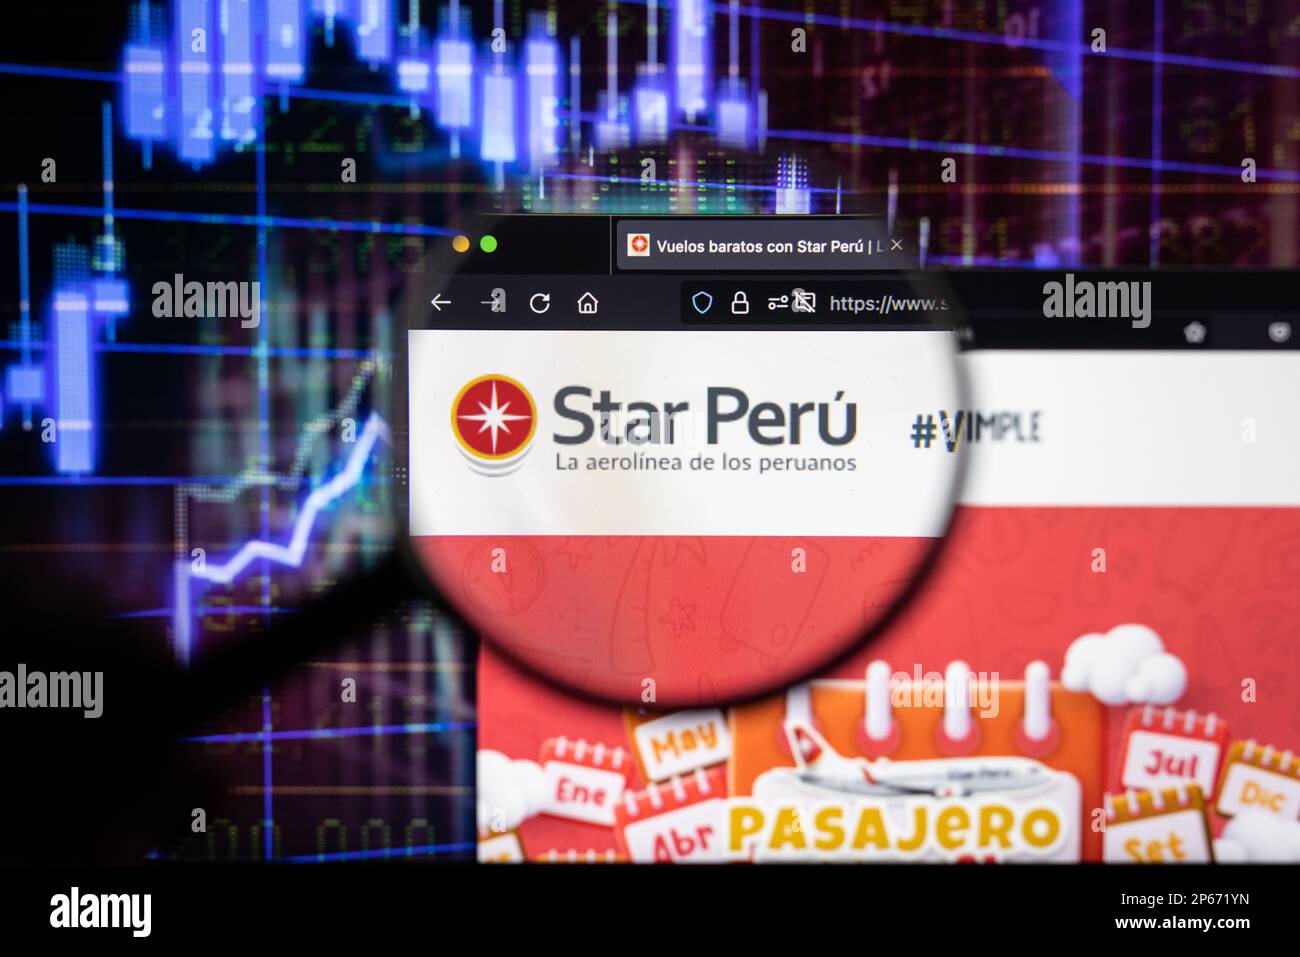 Star Peru company logo on a website with blurry stock market developments in the background, seen on a computer screen through a magnifying glass Stock Photo